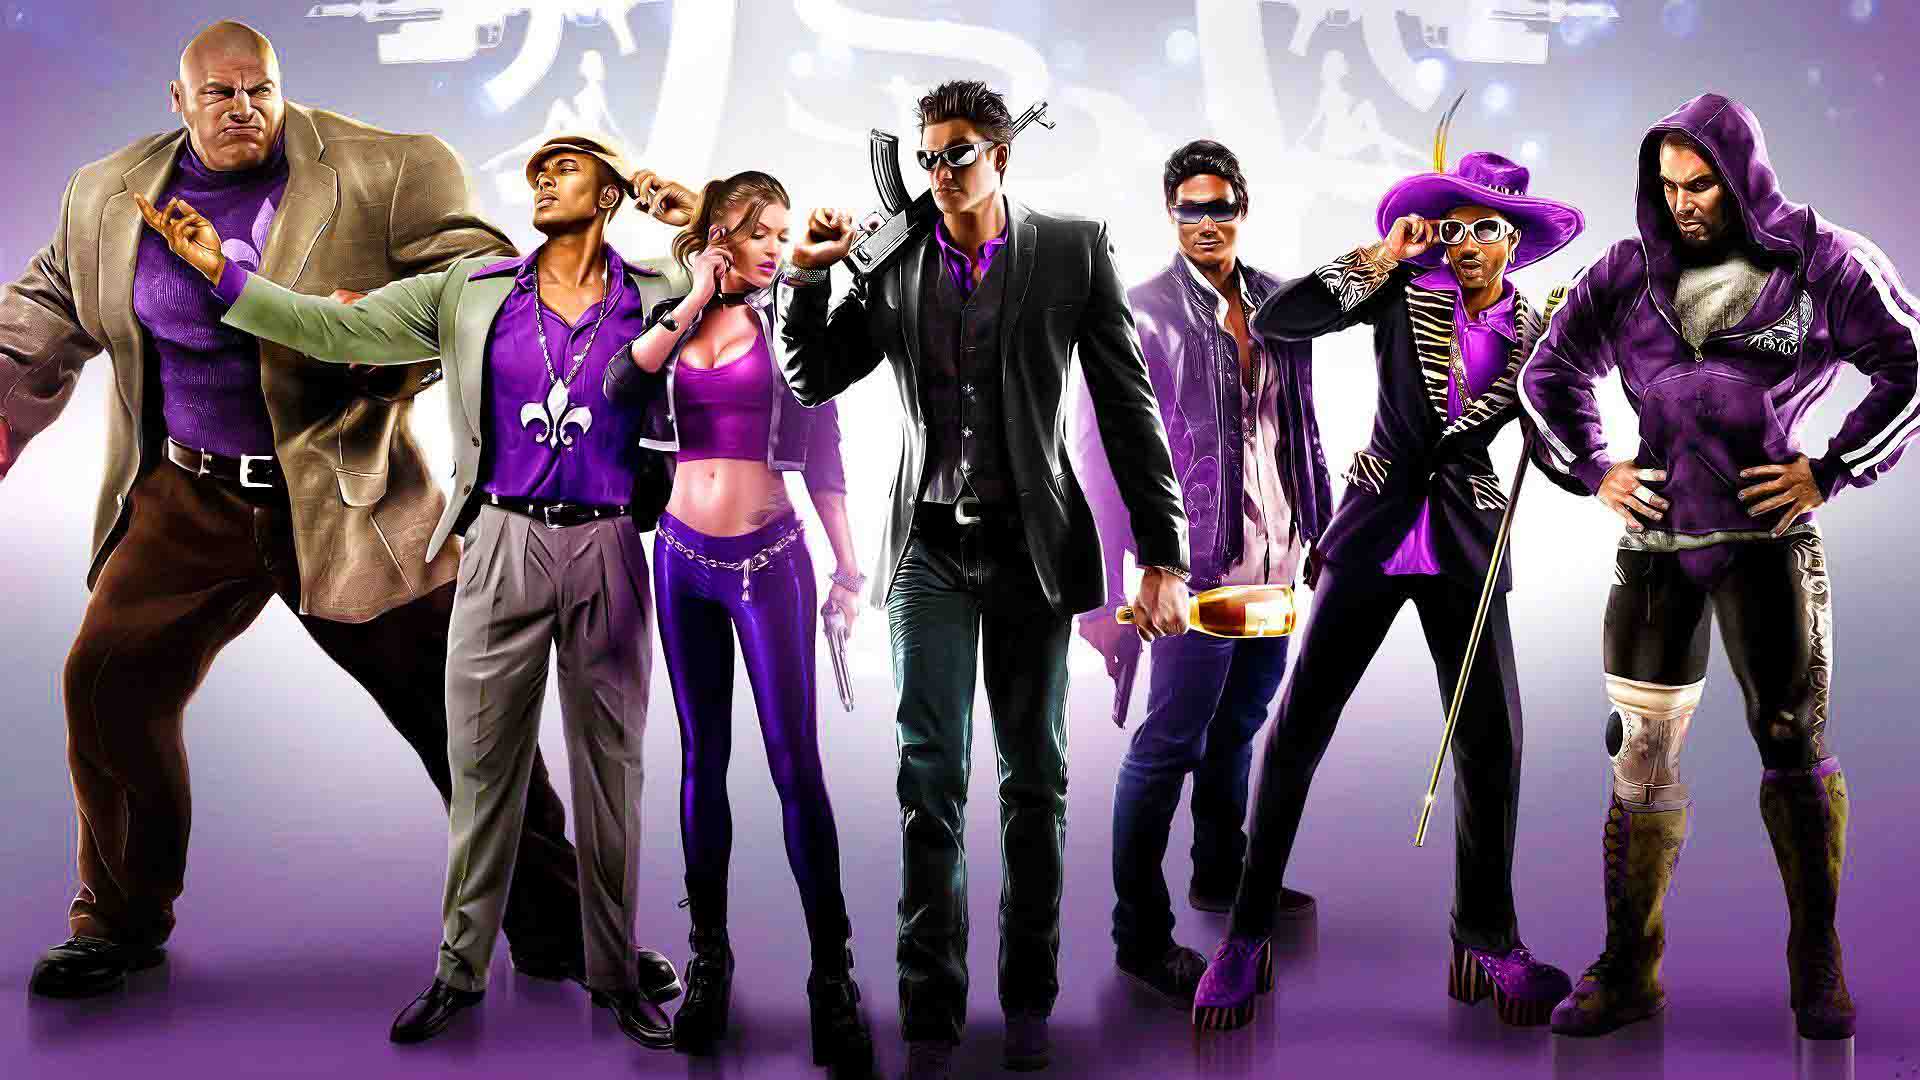 saints row free download for android